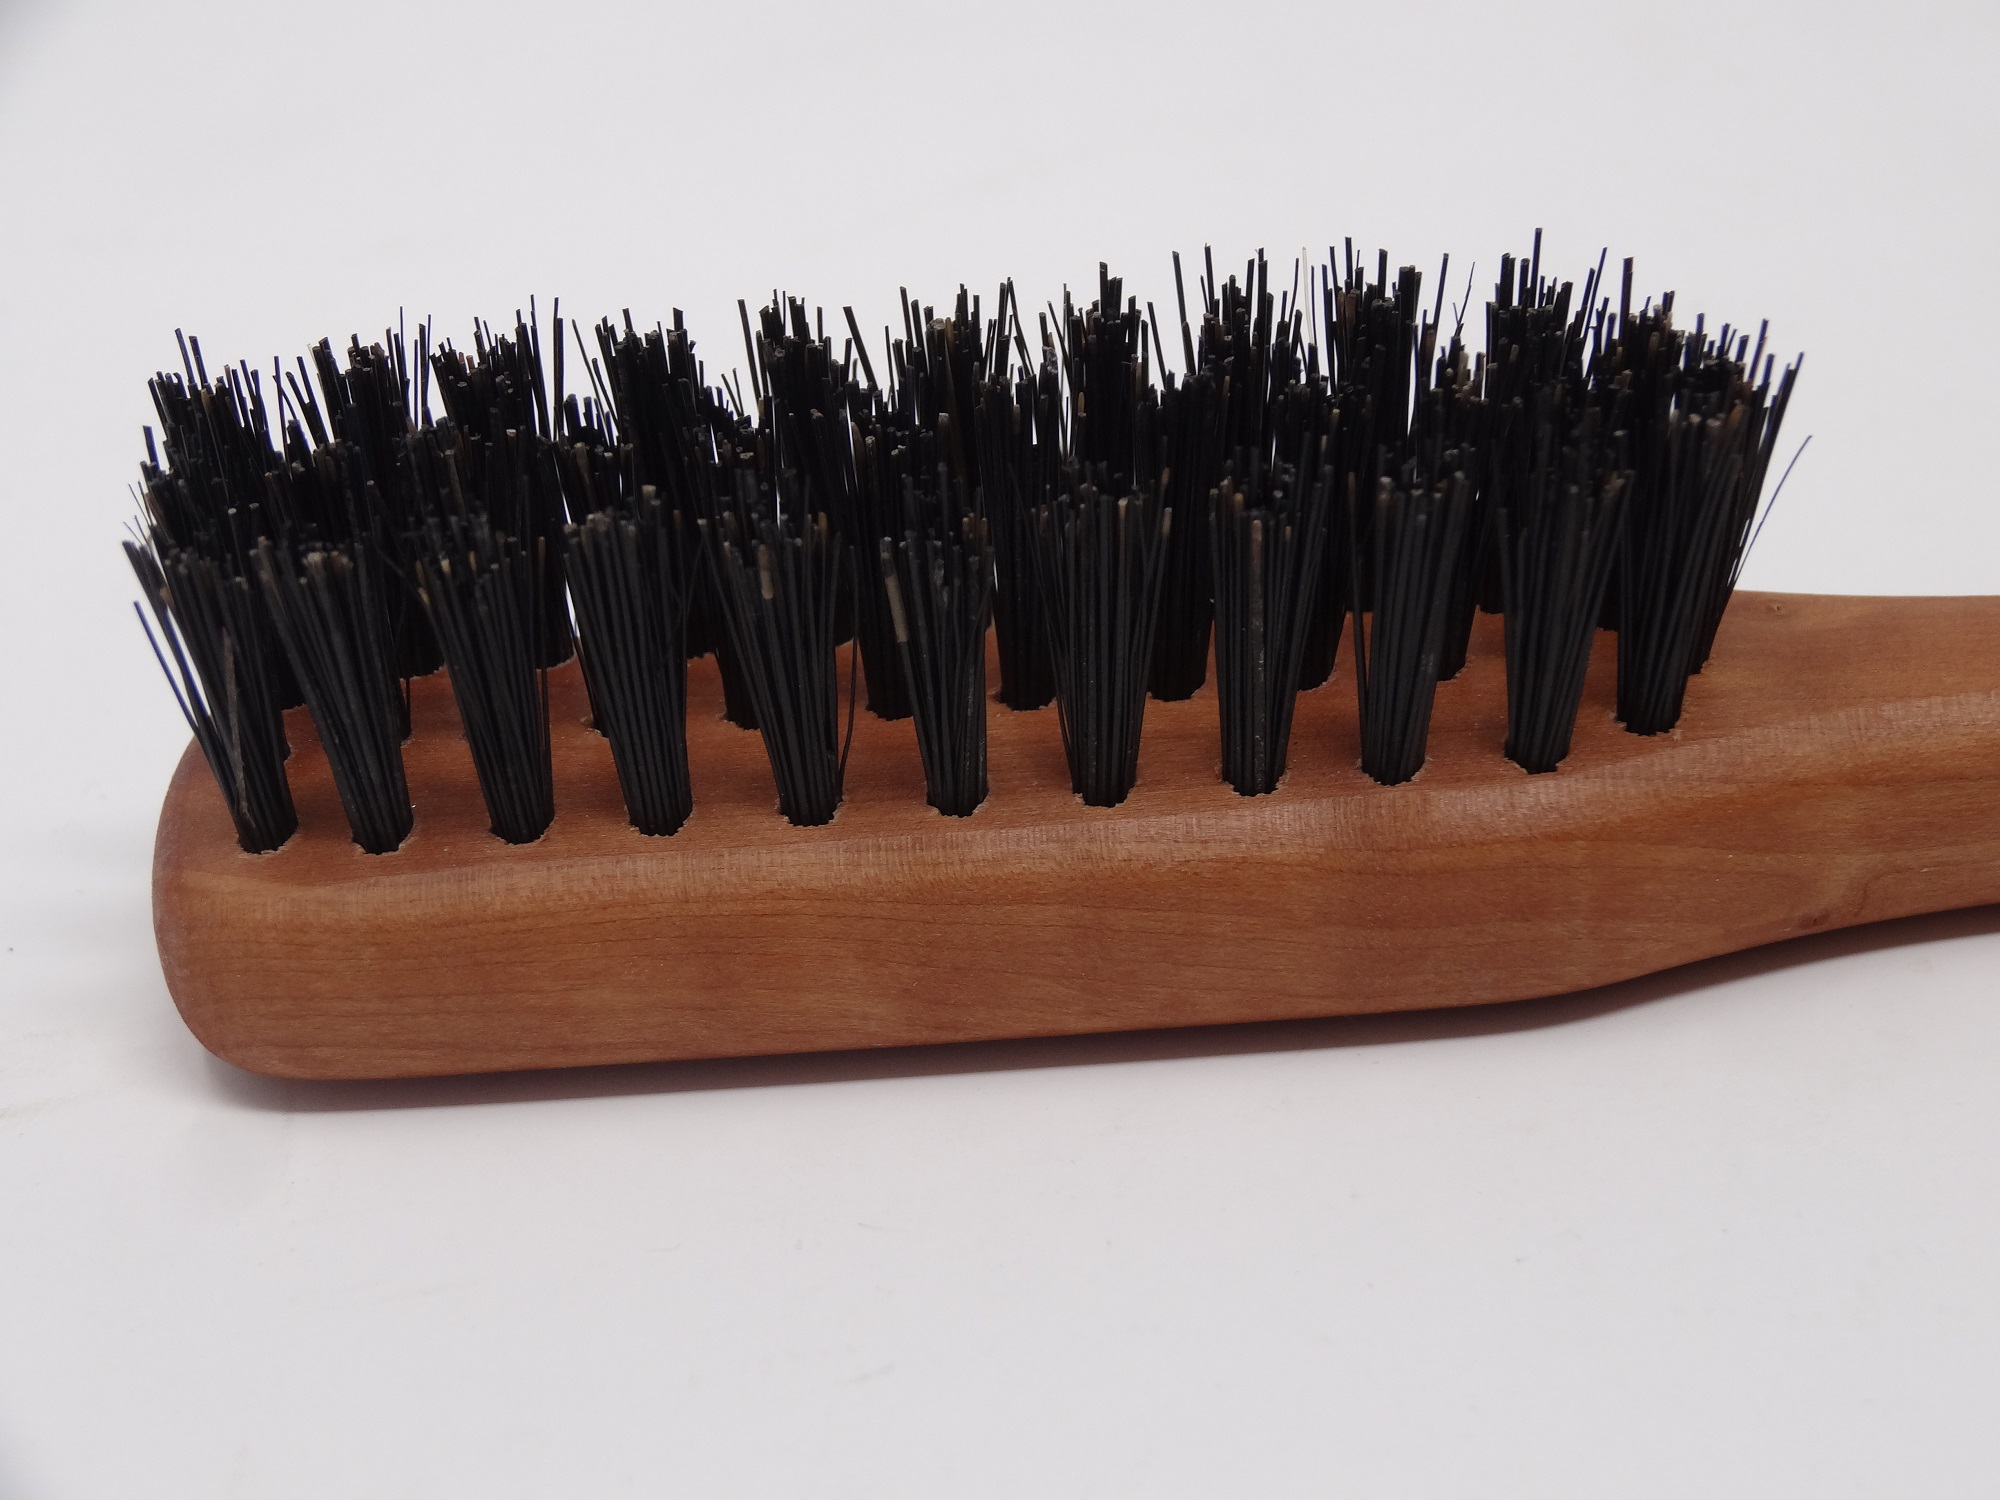 Bear Brush made from pear wood